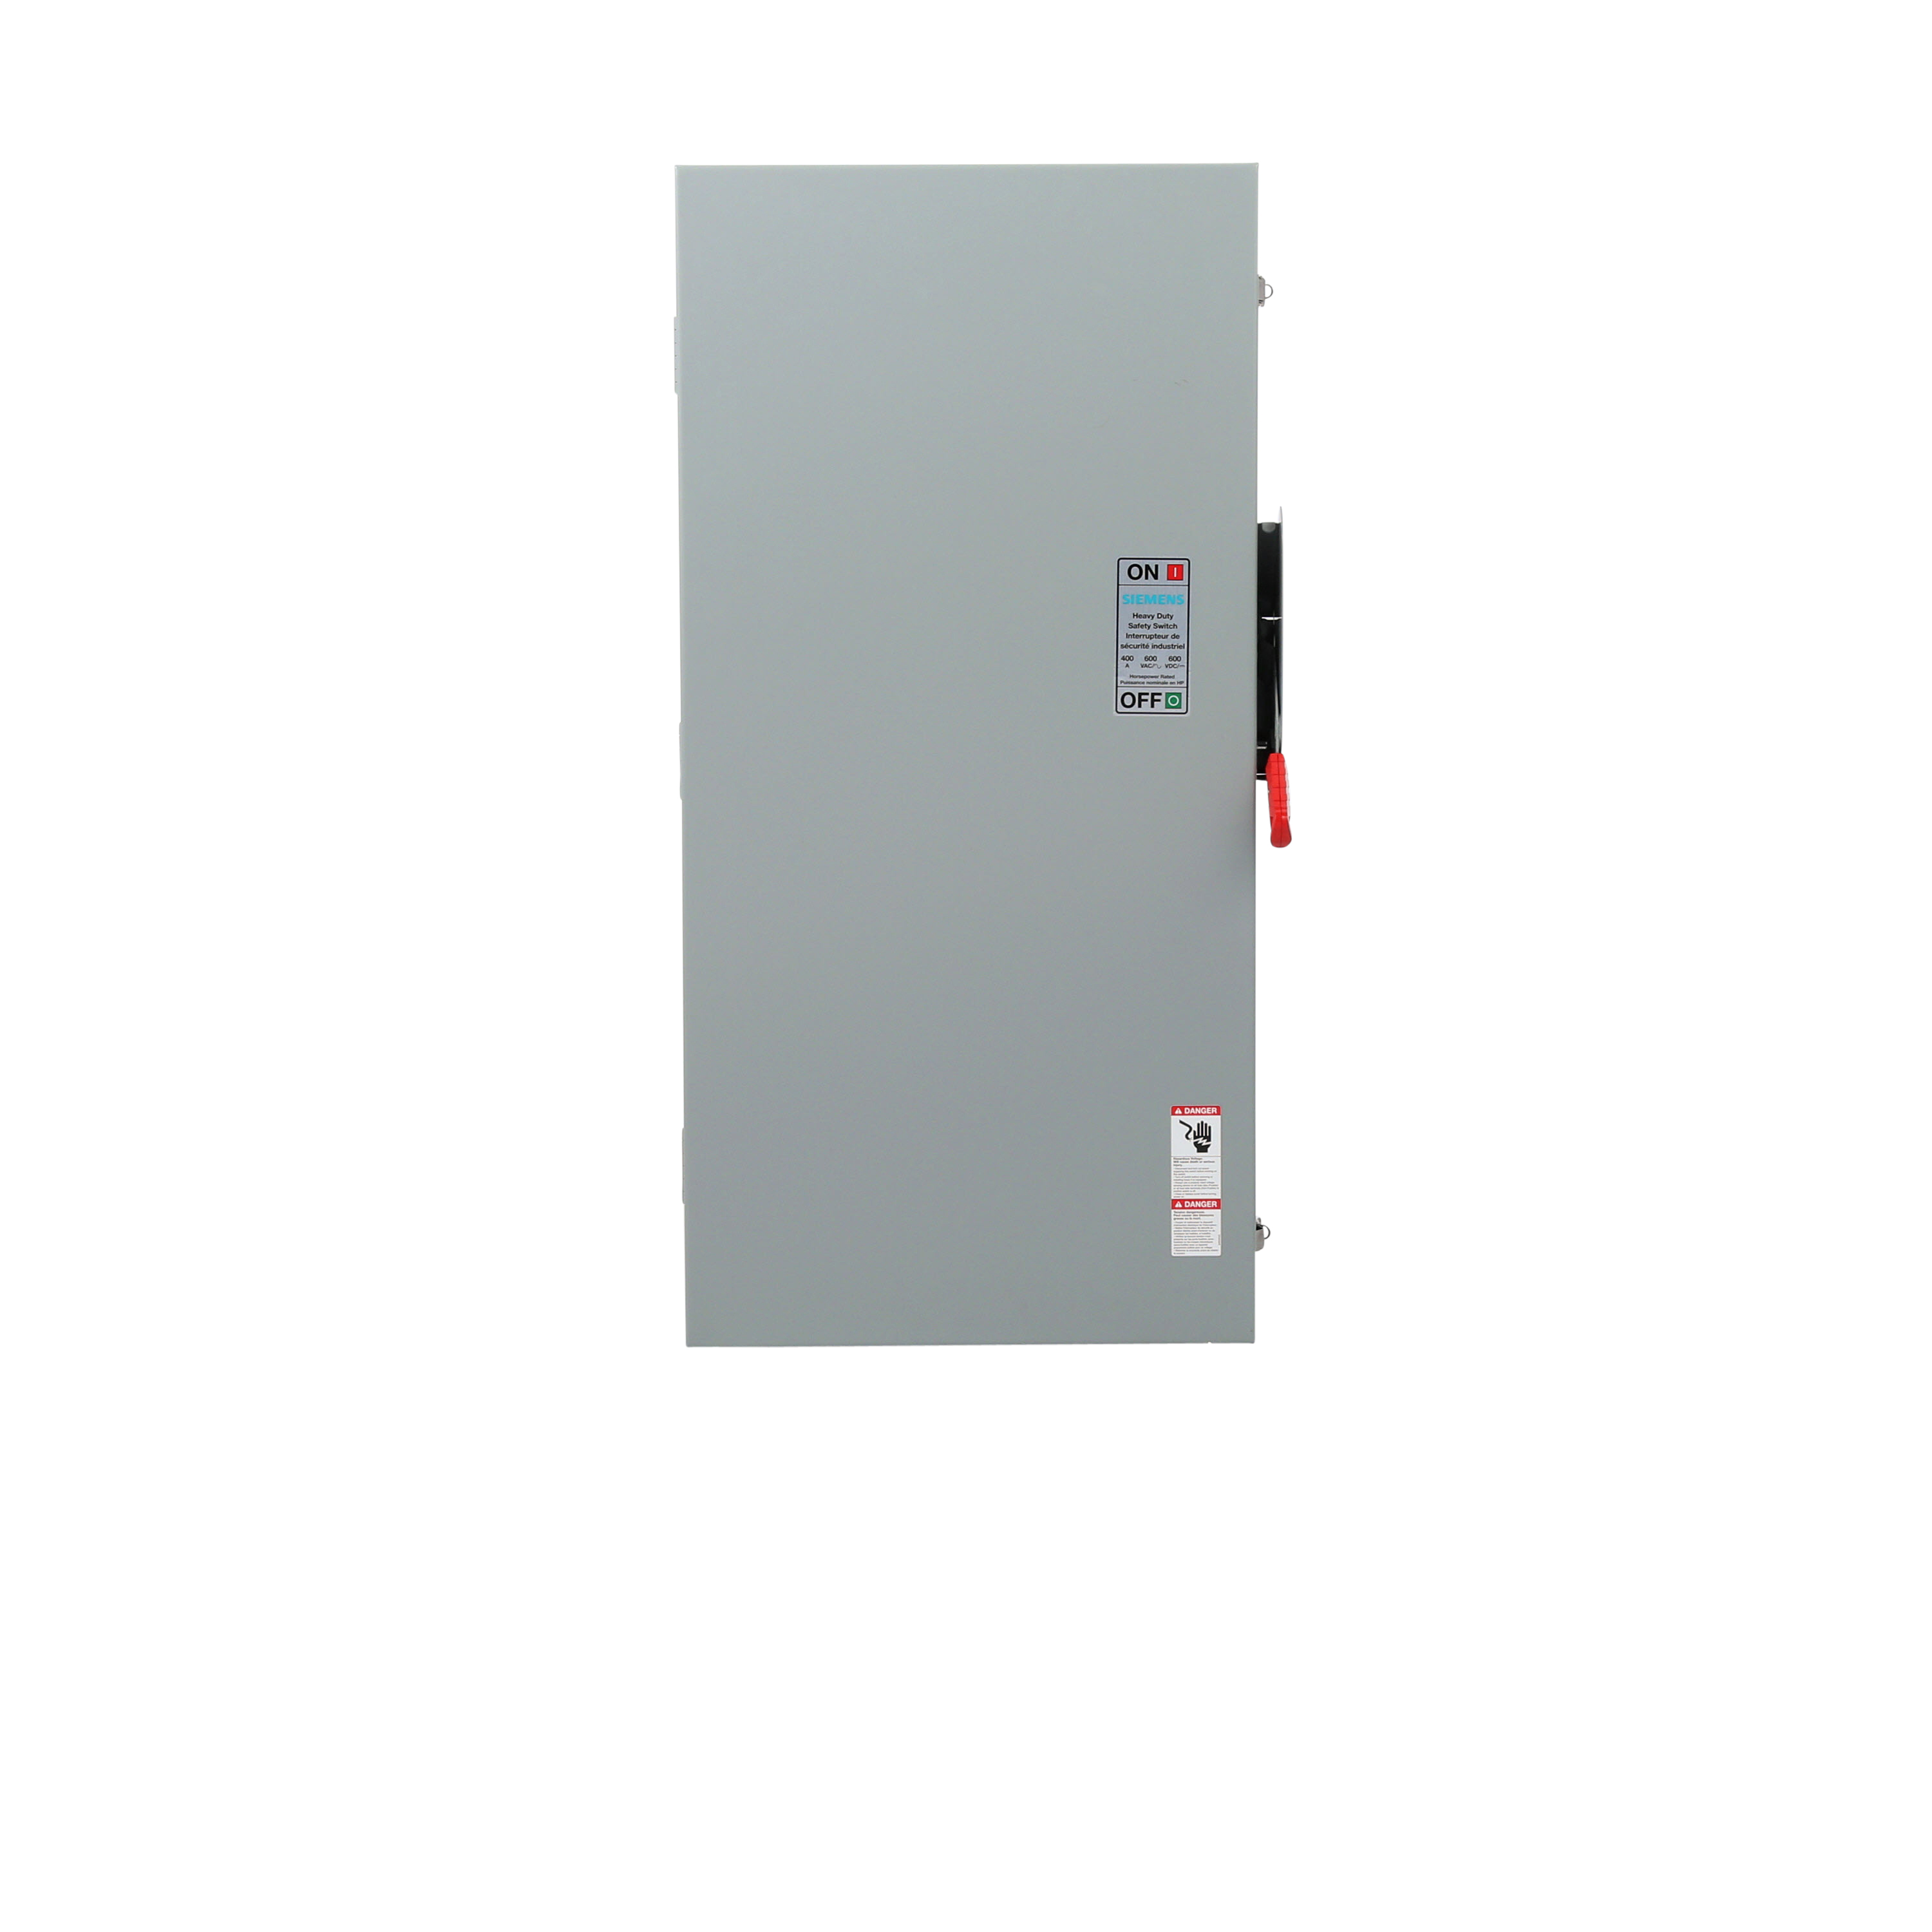 Siemens Low Voltage Circuit Protection Heavy Duty Safety Switch. 3-Pole 3-Fuse and solid neutral Fused in a type 3R enclosure (outdoor). Rated 600VAC (400A).